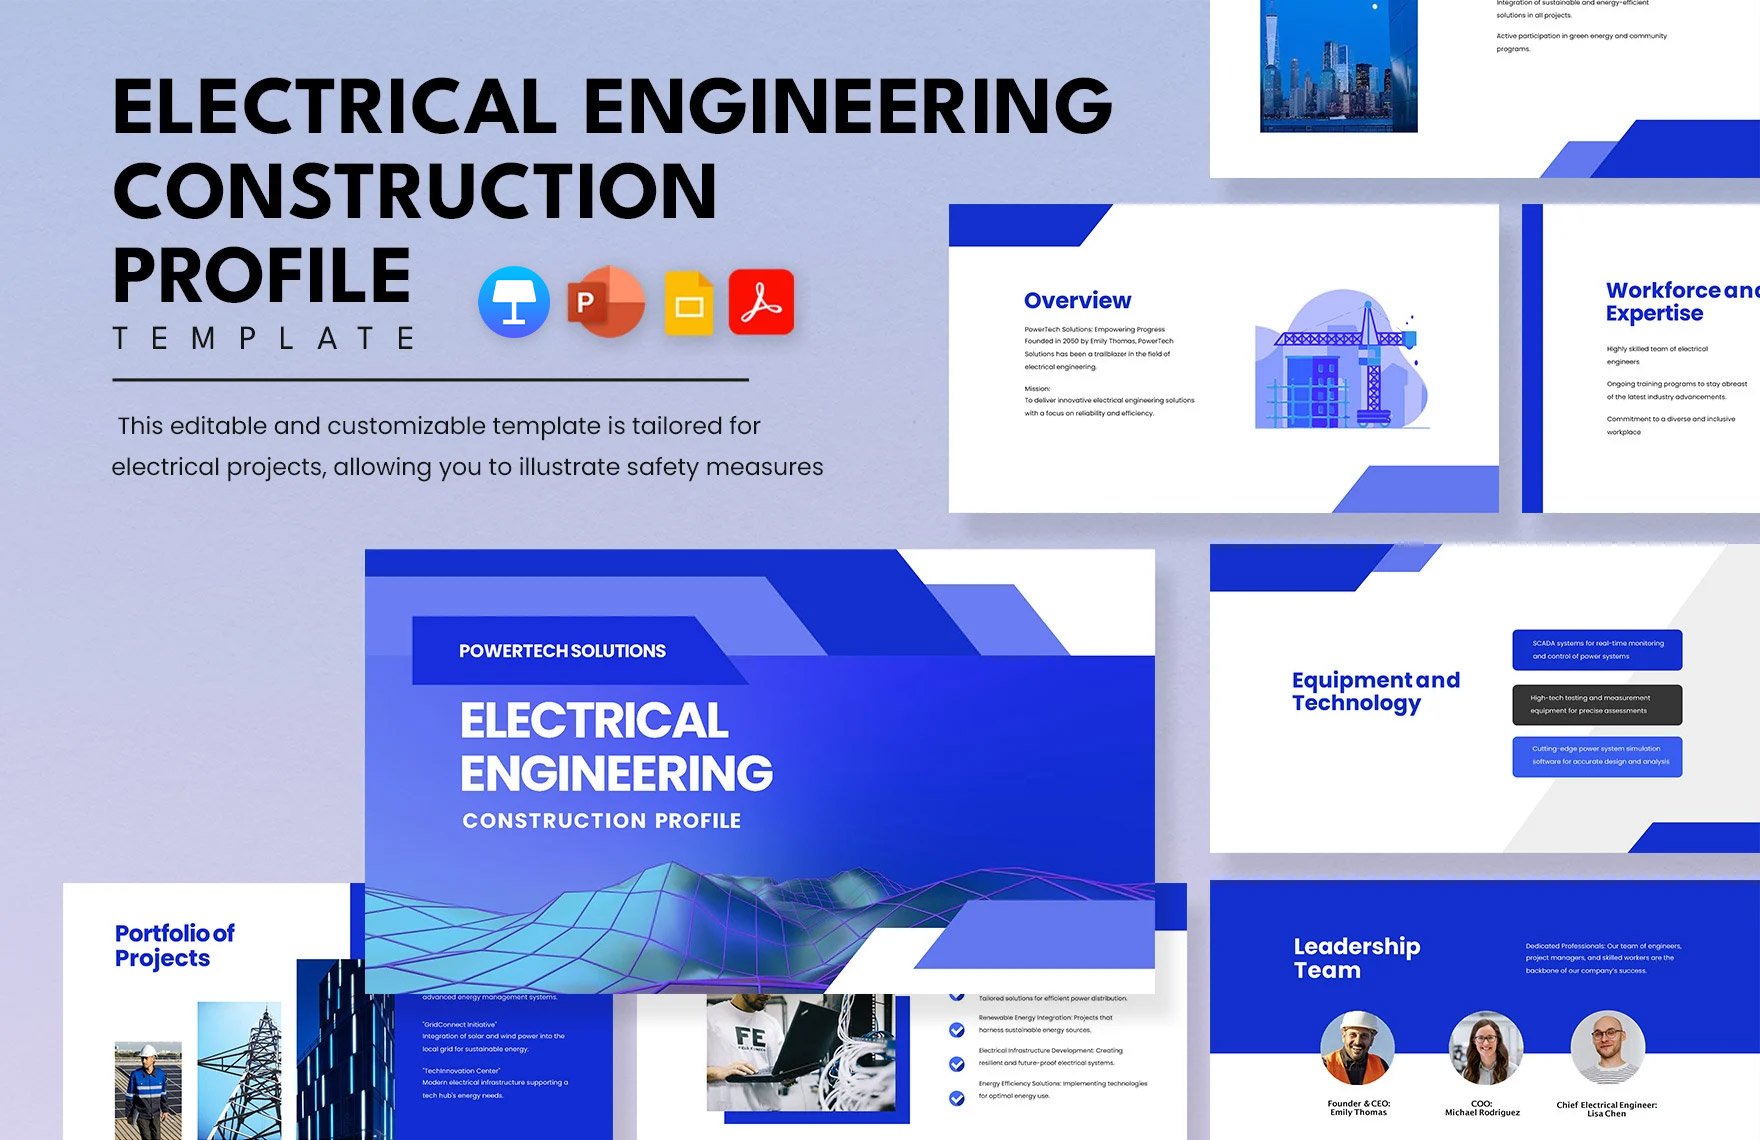 Electrical Engineering Construction Profile Template in PDF, PowerPoint, Google Slides, Apple Keynote